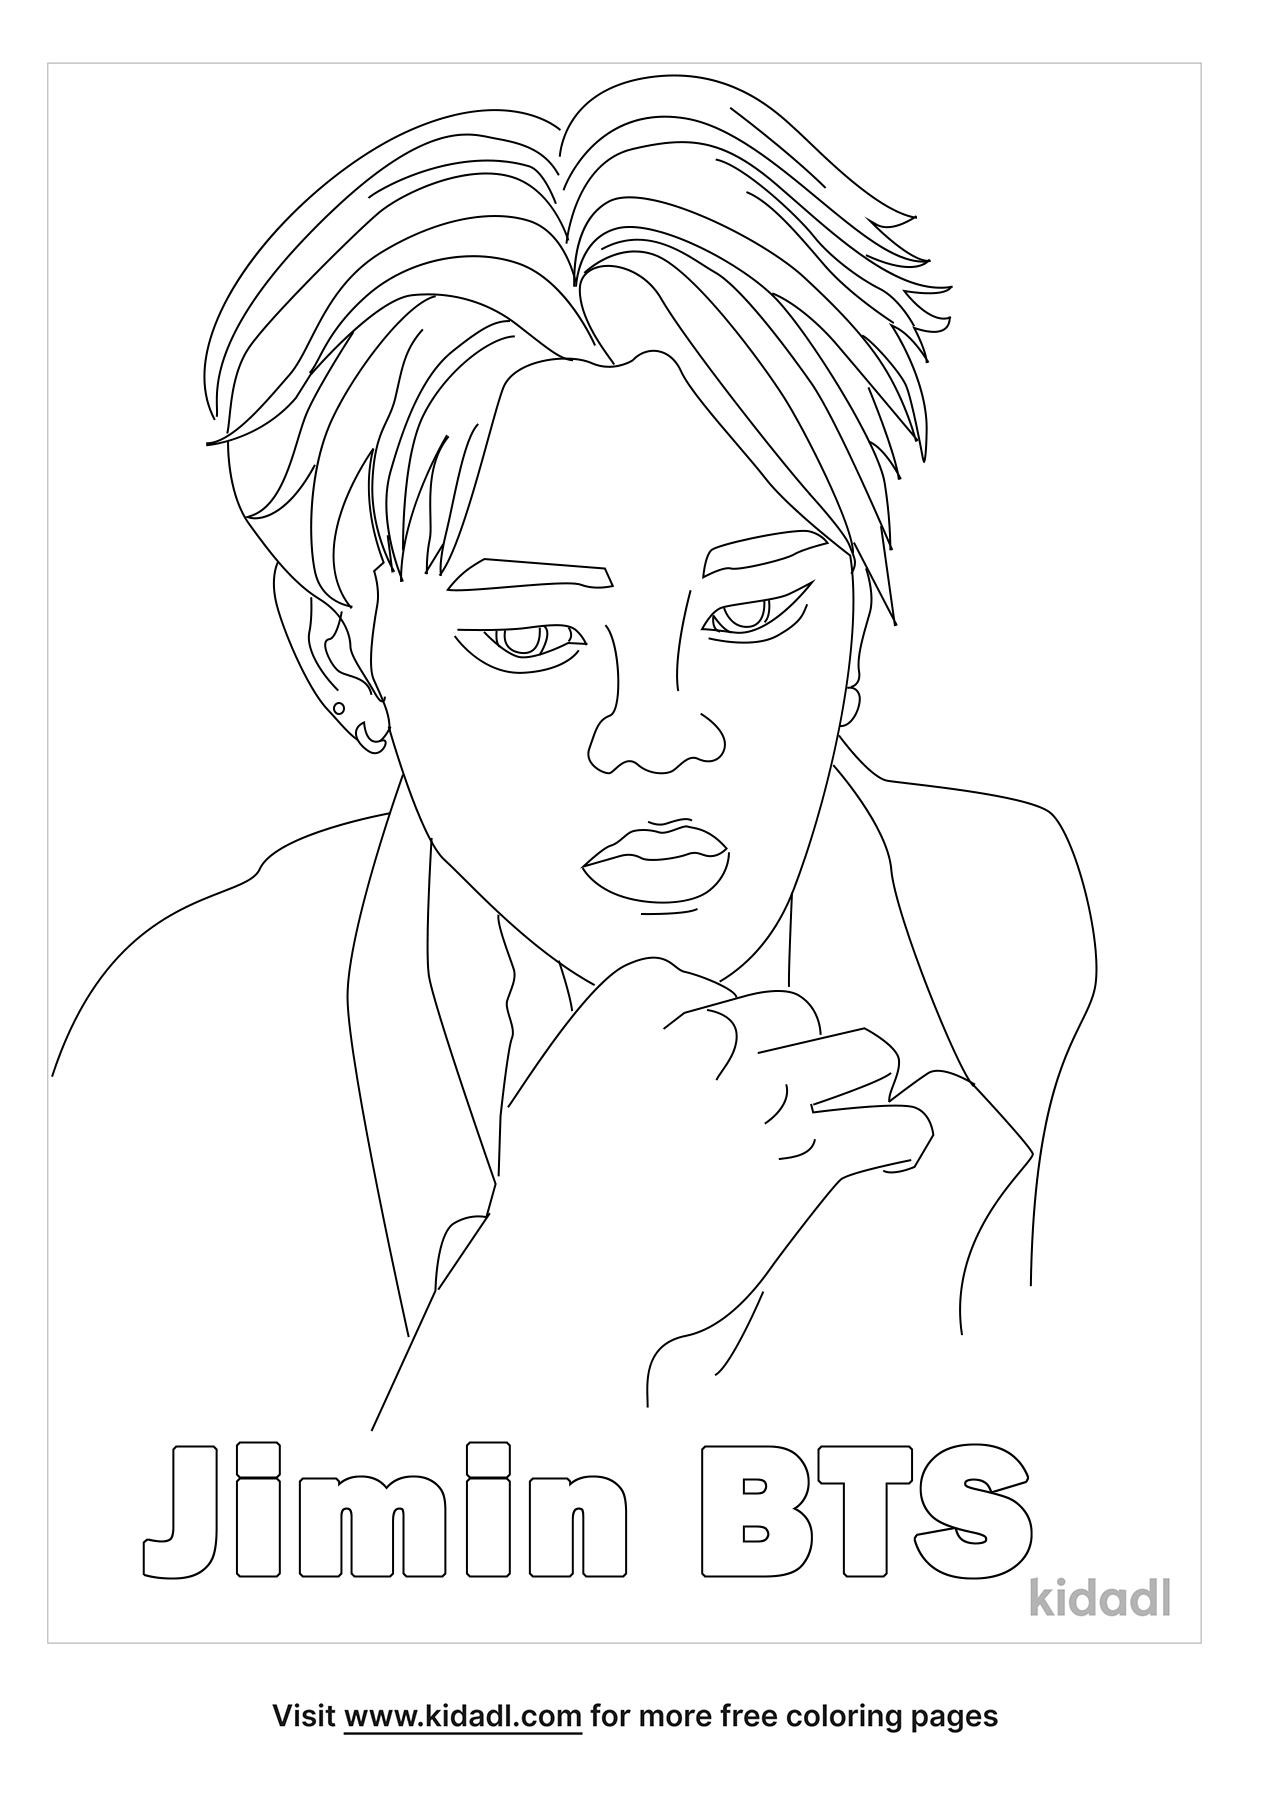 Jimin Bts Coloring Pages | Free Music Coloring Pages | Kidadl